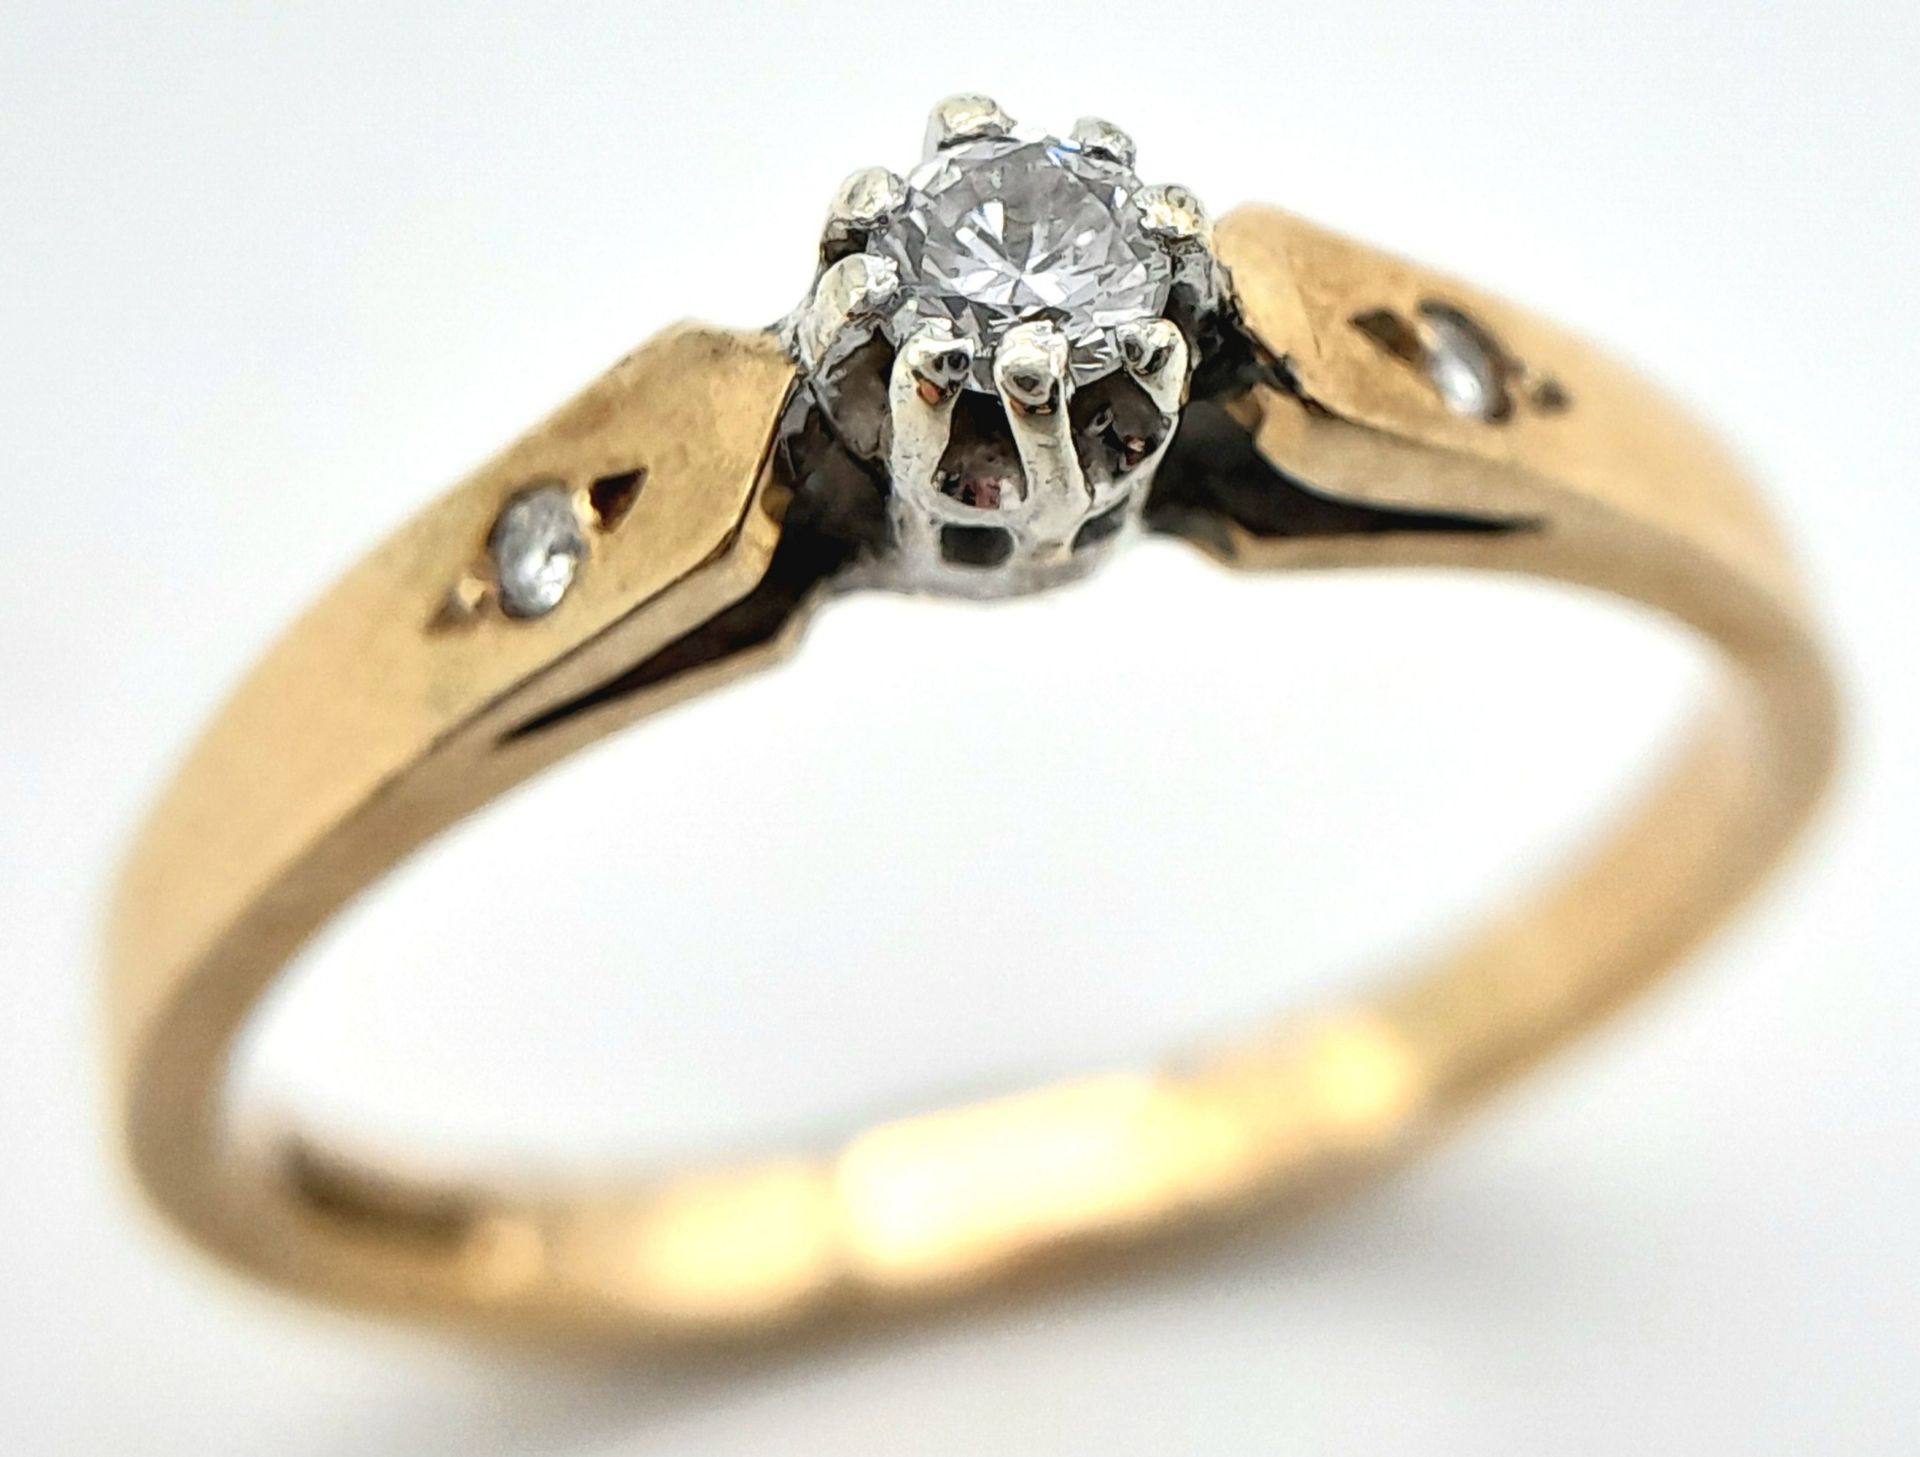 A 9K YELLOW GOLD DIAMOND SOLITAIRE RING. 0.10CT. 1.8G. SIZE N - Image 4 of 6